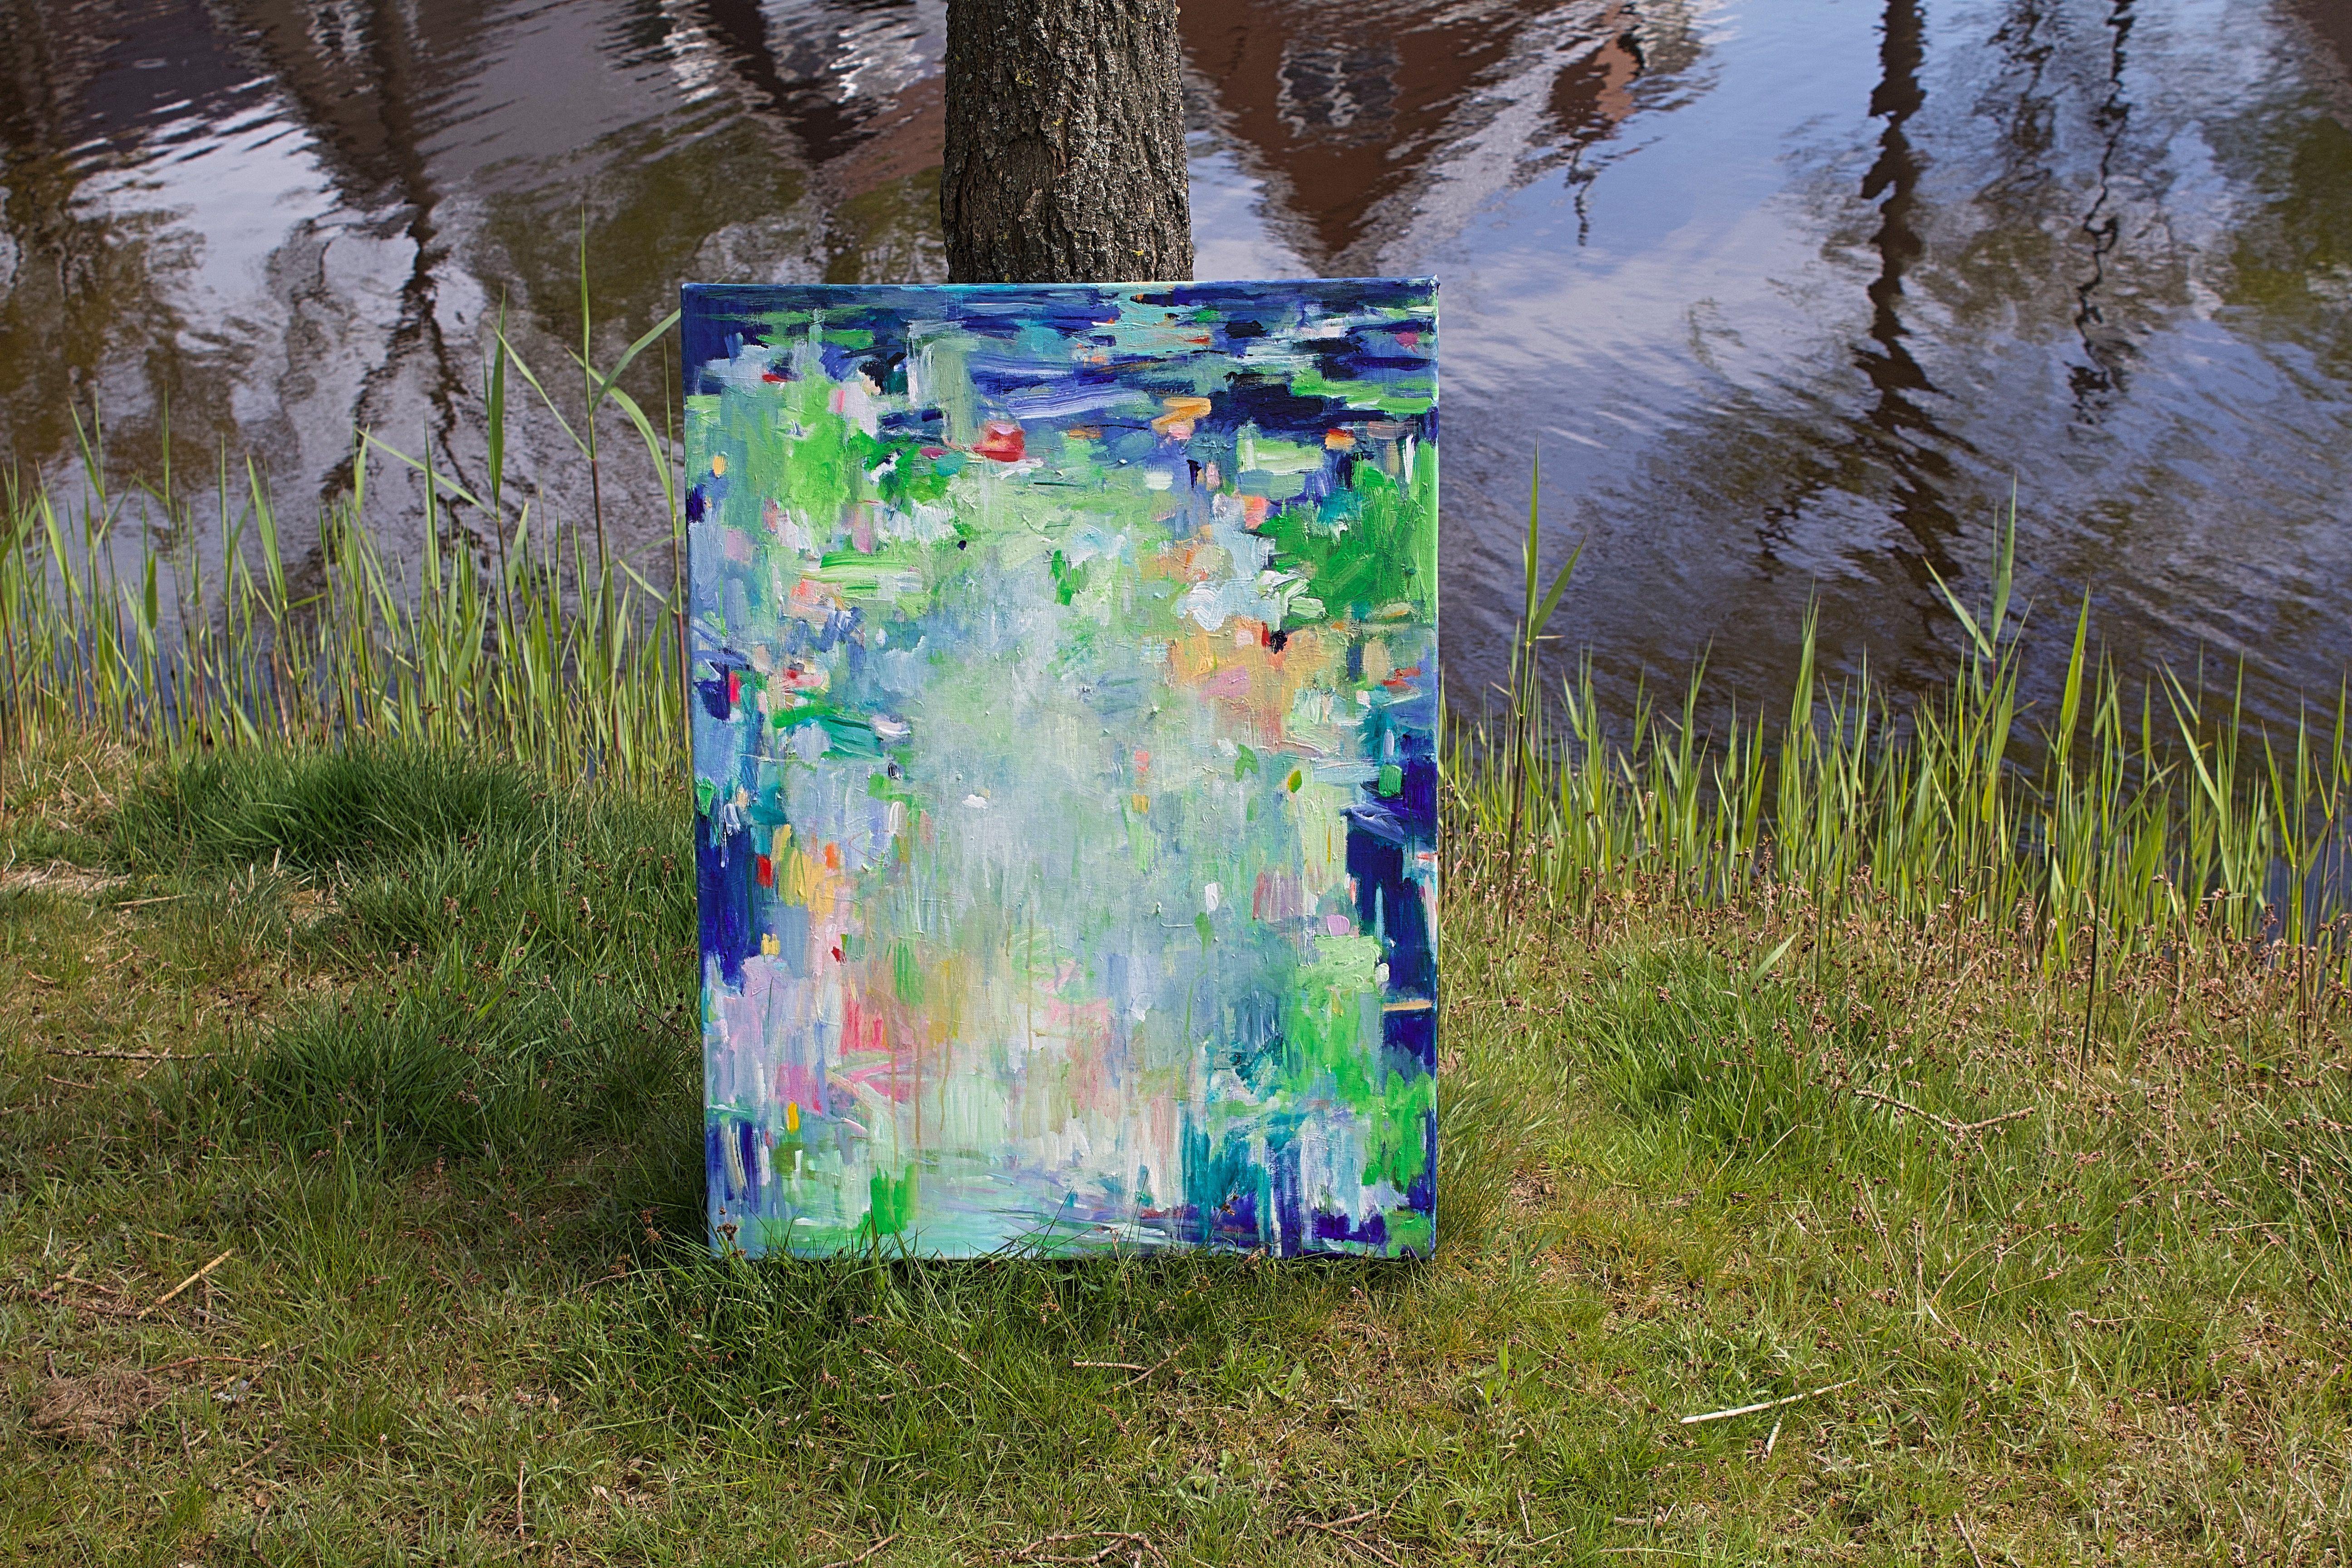 This painting is nr 7 in the ongoing serie Sea of glass. This serie is inspired by the reflections of the surroundings of a watersurface. This can be bushes, trees, flowers, clouds or any other botanical scene.  The weather conditions that changes